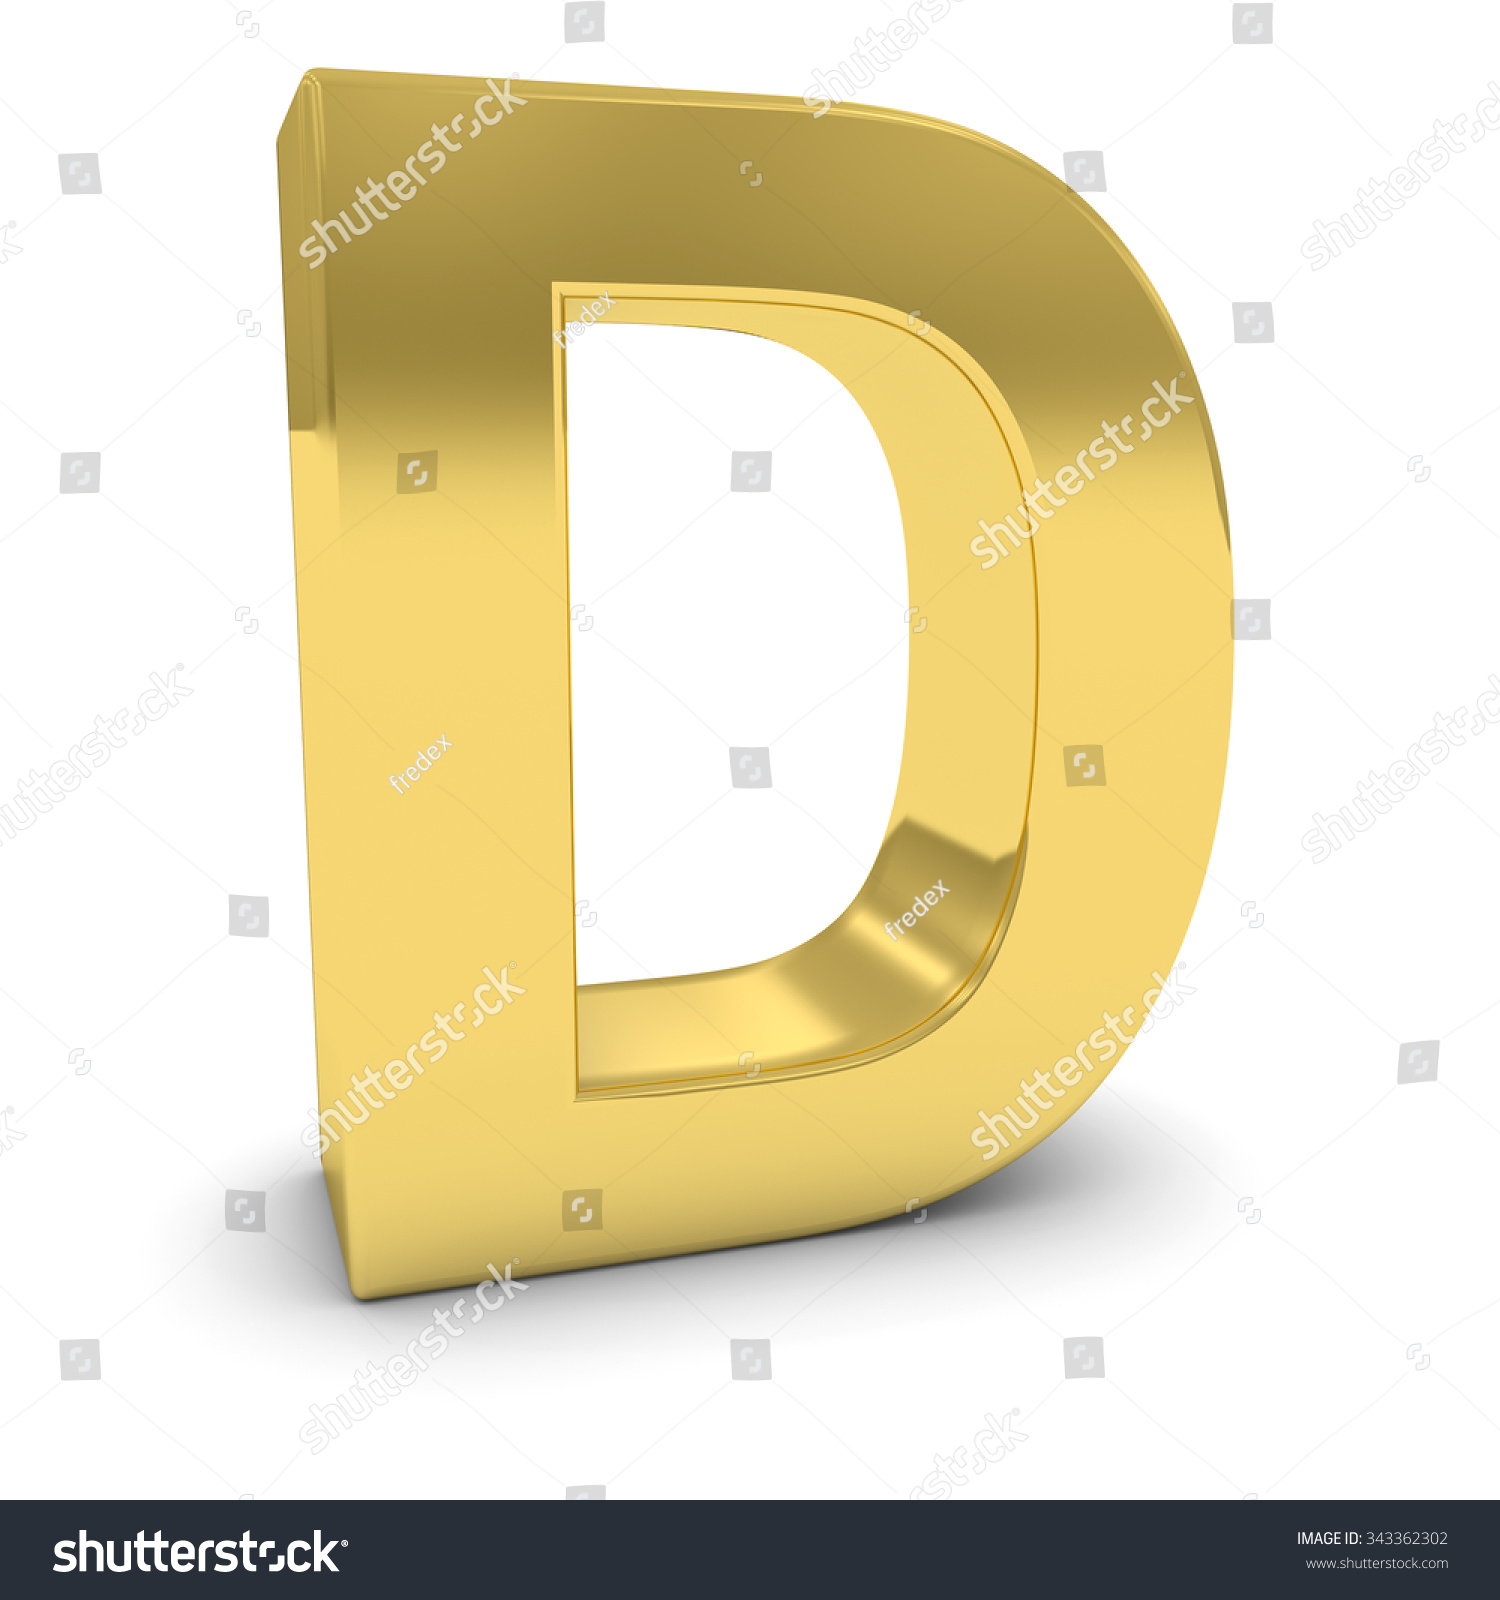 Gold 3d Uppercase Letter D Isolated On White With Shadows Stock Photo ...